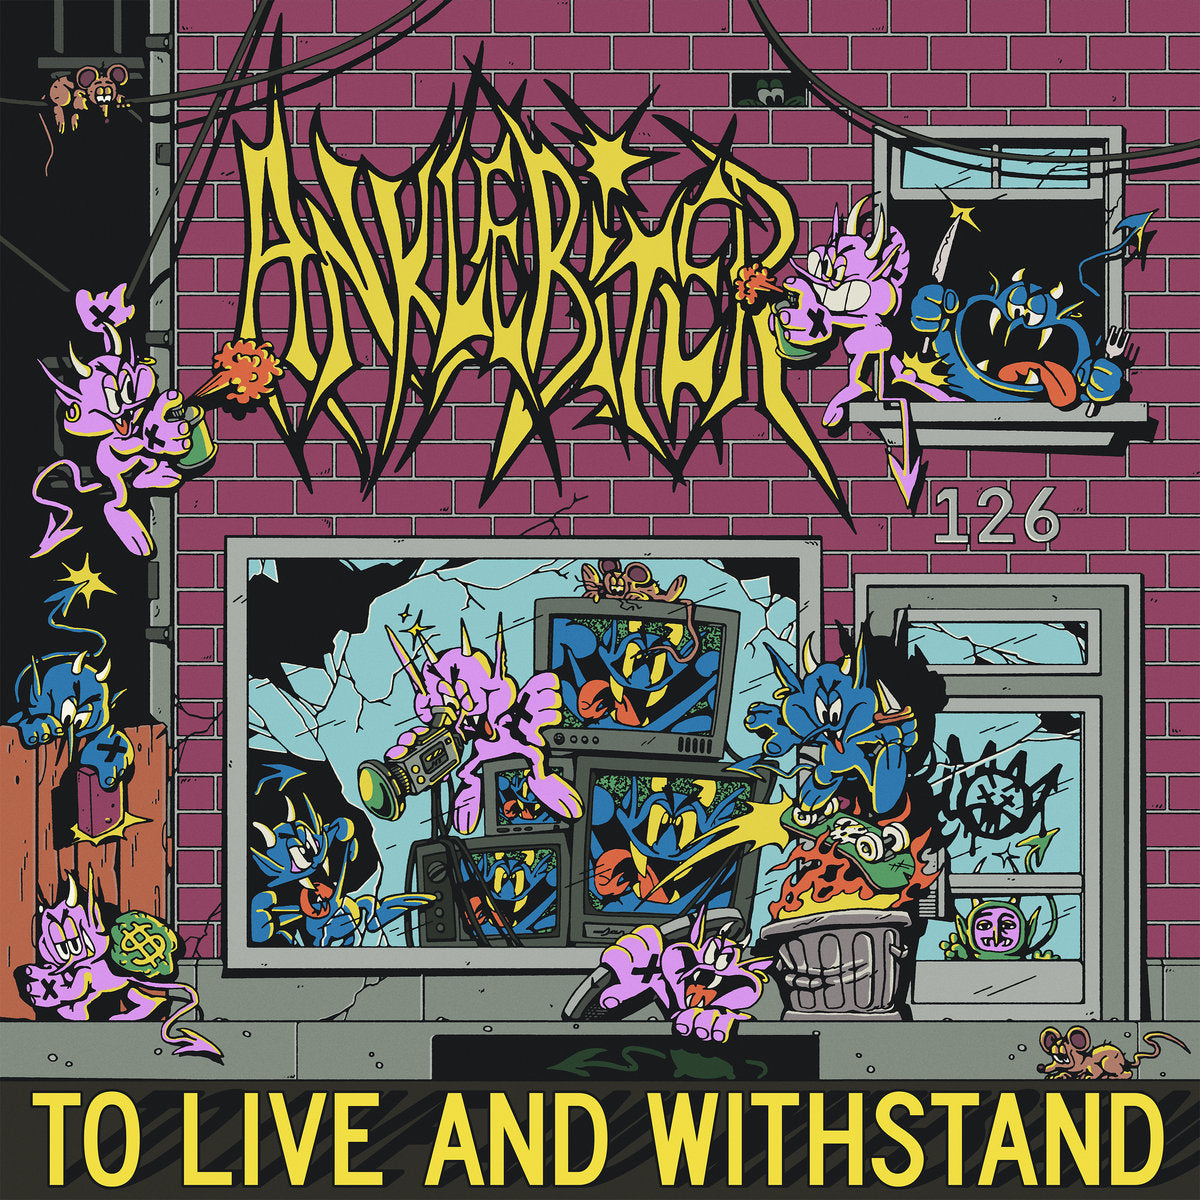 Anklebiter "To Live and Withstand" 7"